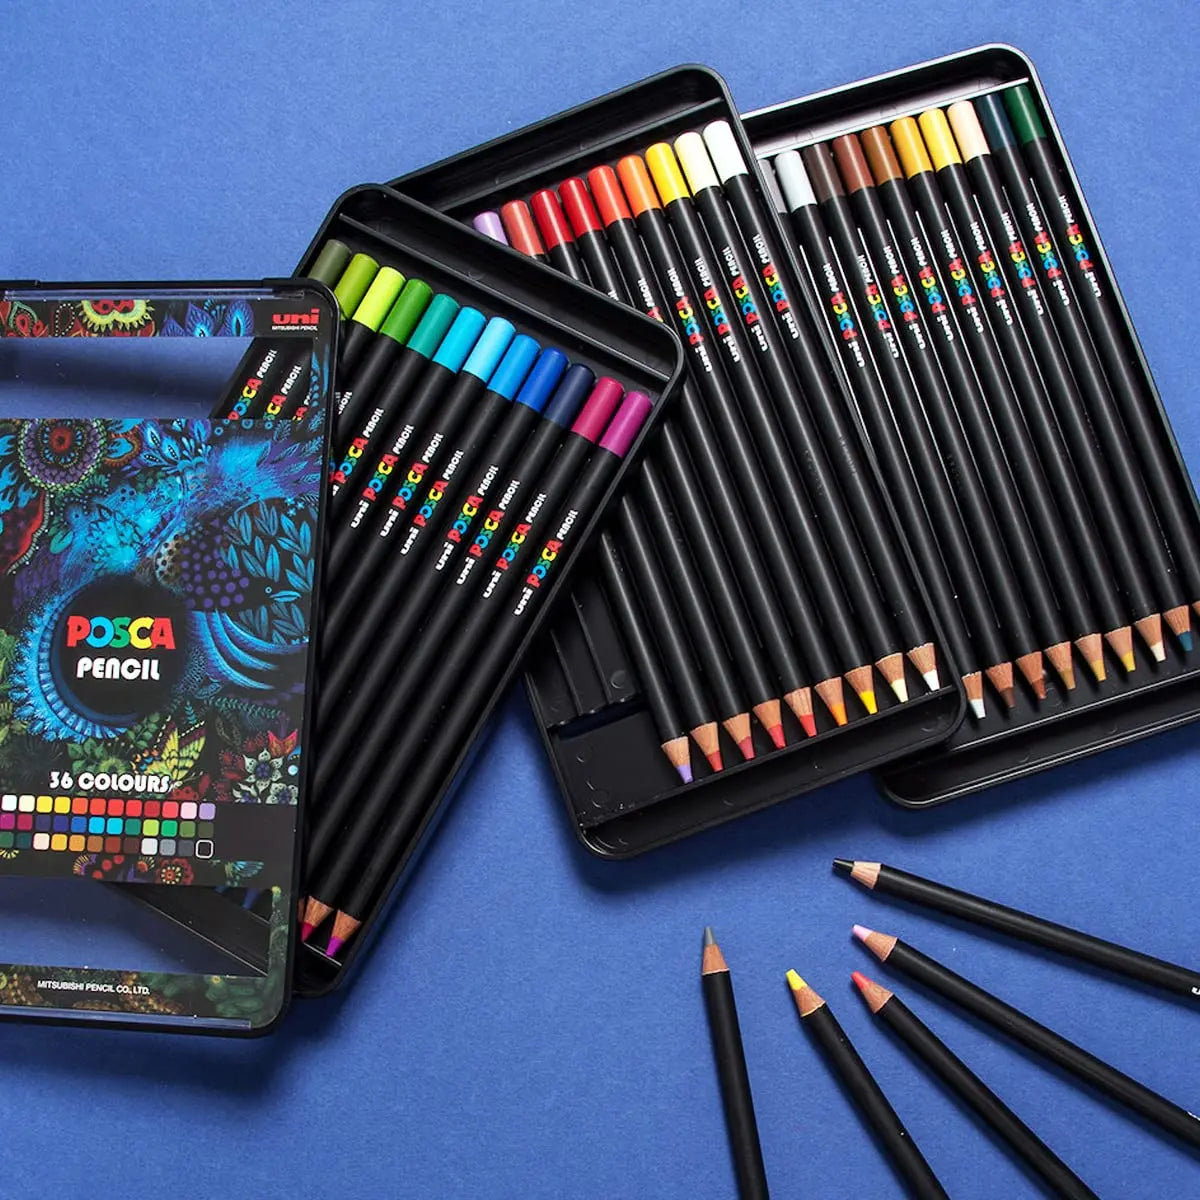 Buy Uniball Posca Water Based Paint Markers to explore endless art